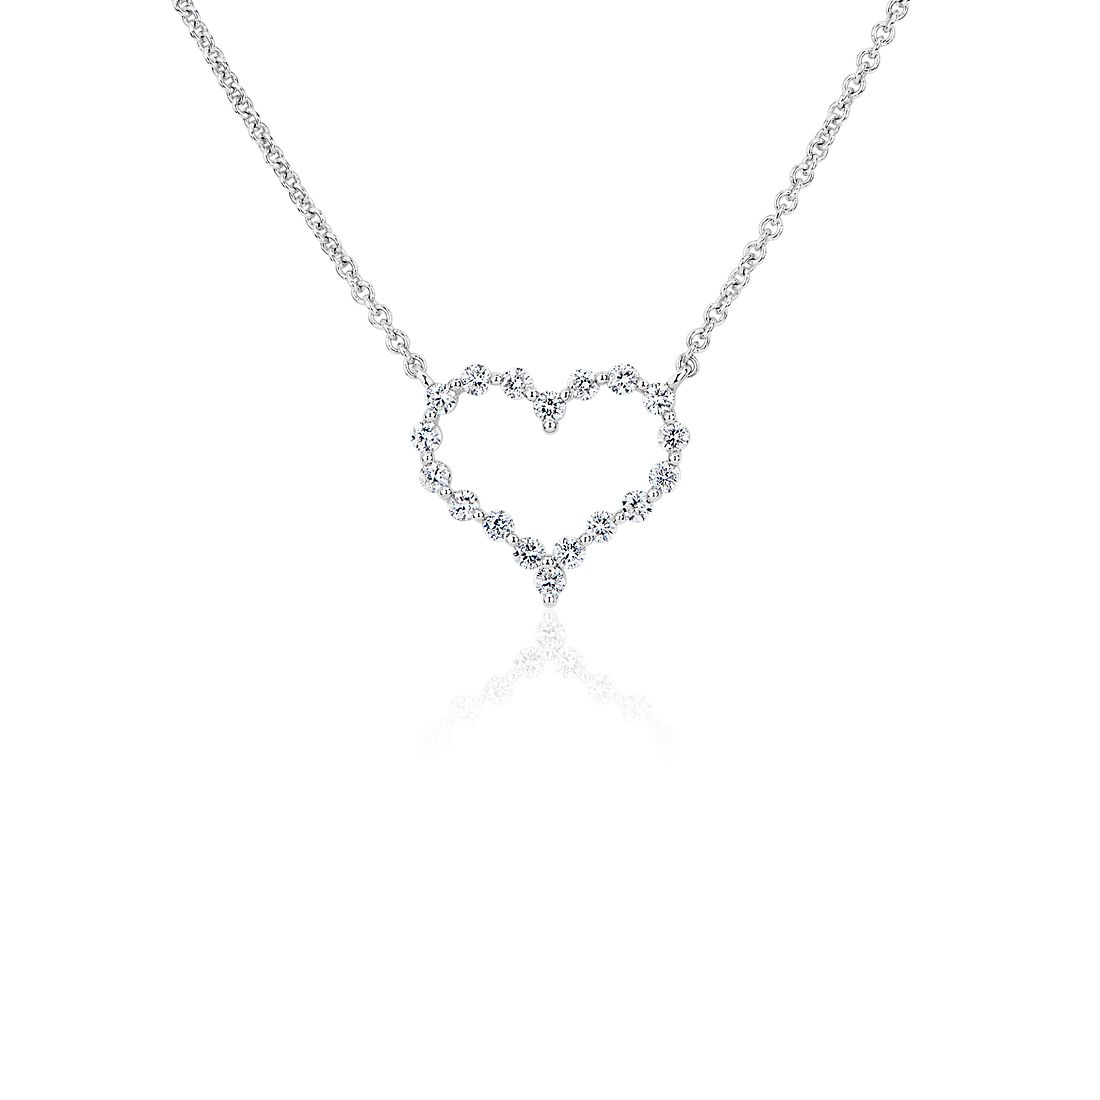 Floating Diamond Heart Necklace in 14k White Gold (1/4 ct. tw.)